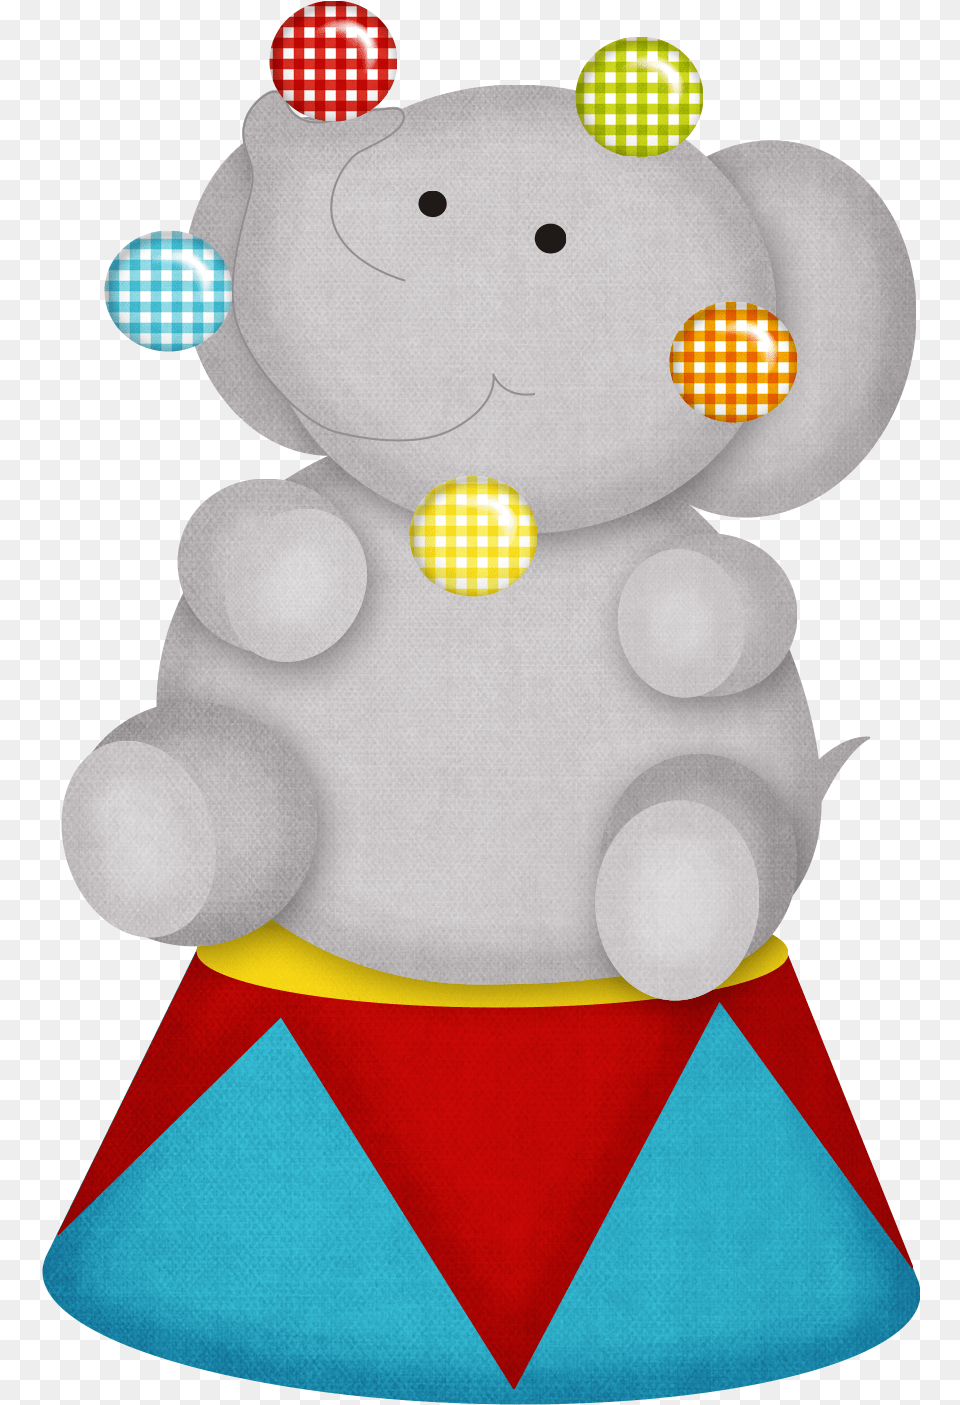 Images For Circus Lion Carnival Elephant Clip Art, Plush, Toy, Applique, Pattern Free Png Download